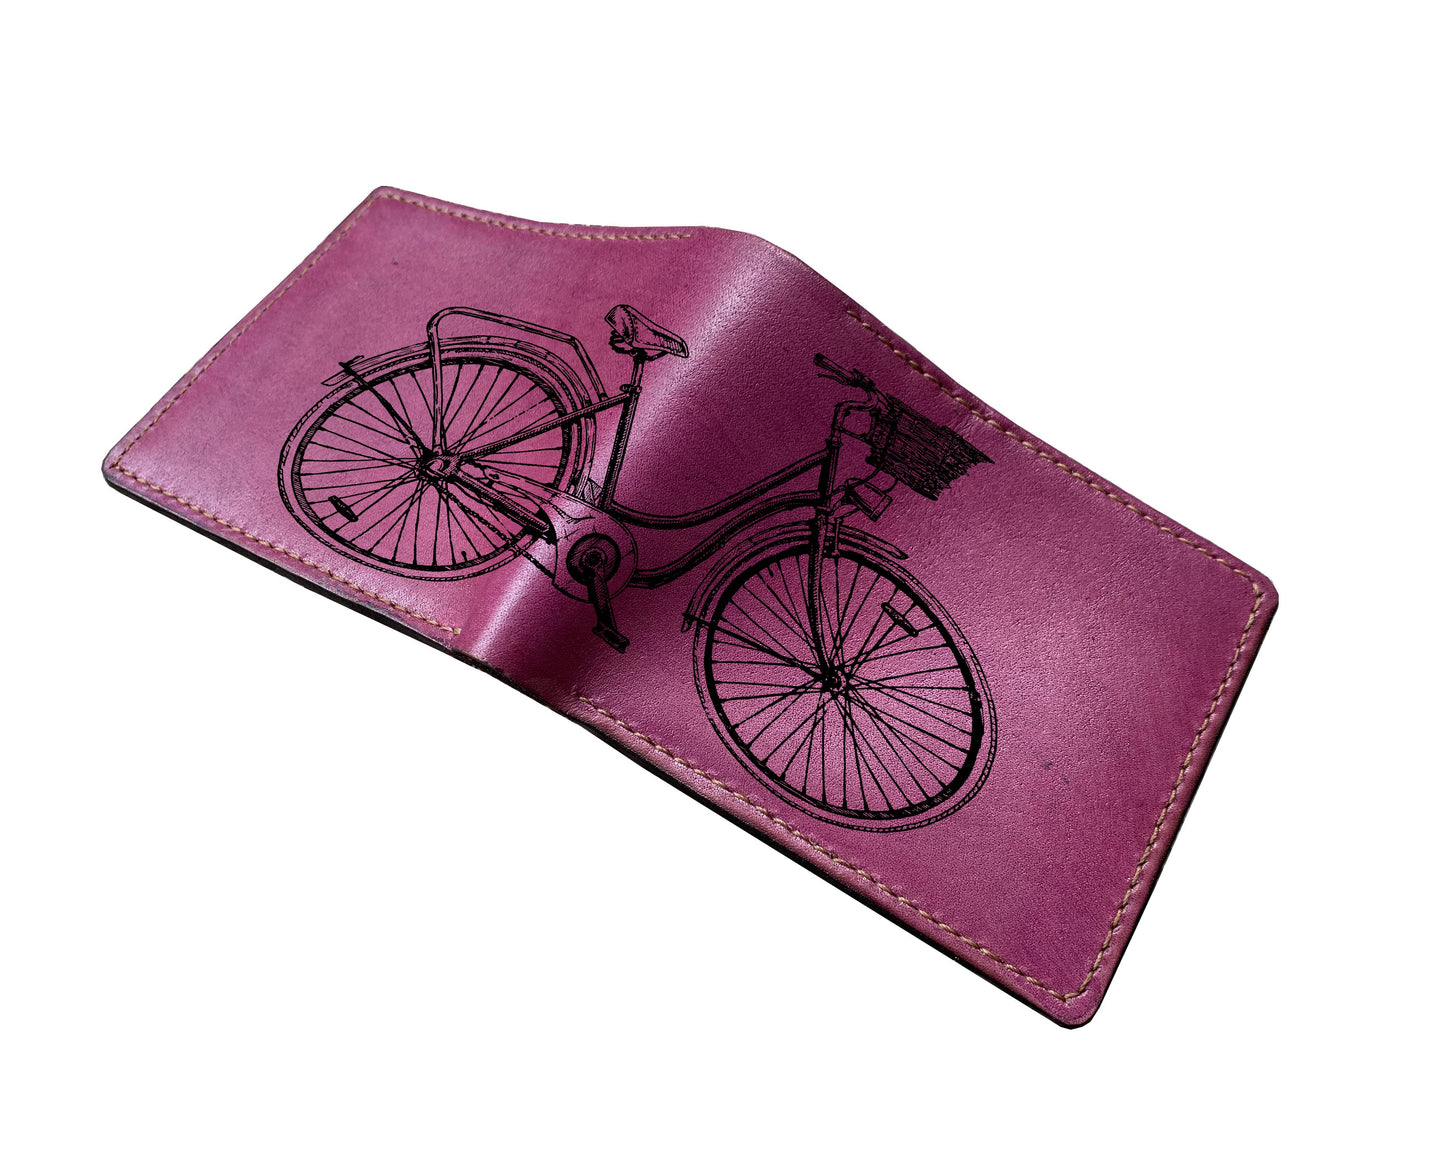 Mayan Corner - Vintage object retro style wallet, bicycle drawing pattern gift, engrave wallet for him, personalized leather men wallet, cool leather gift